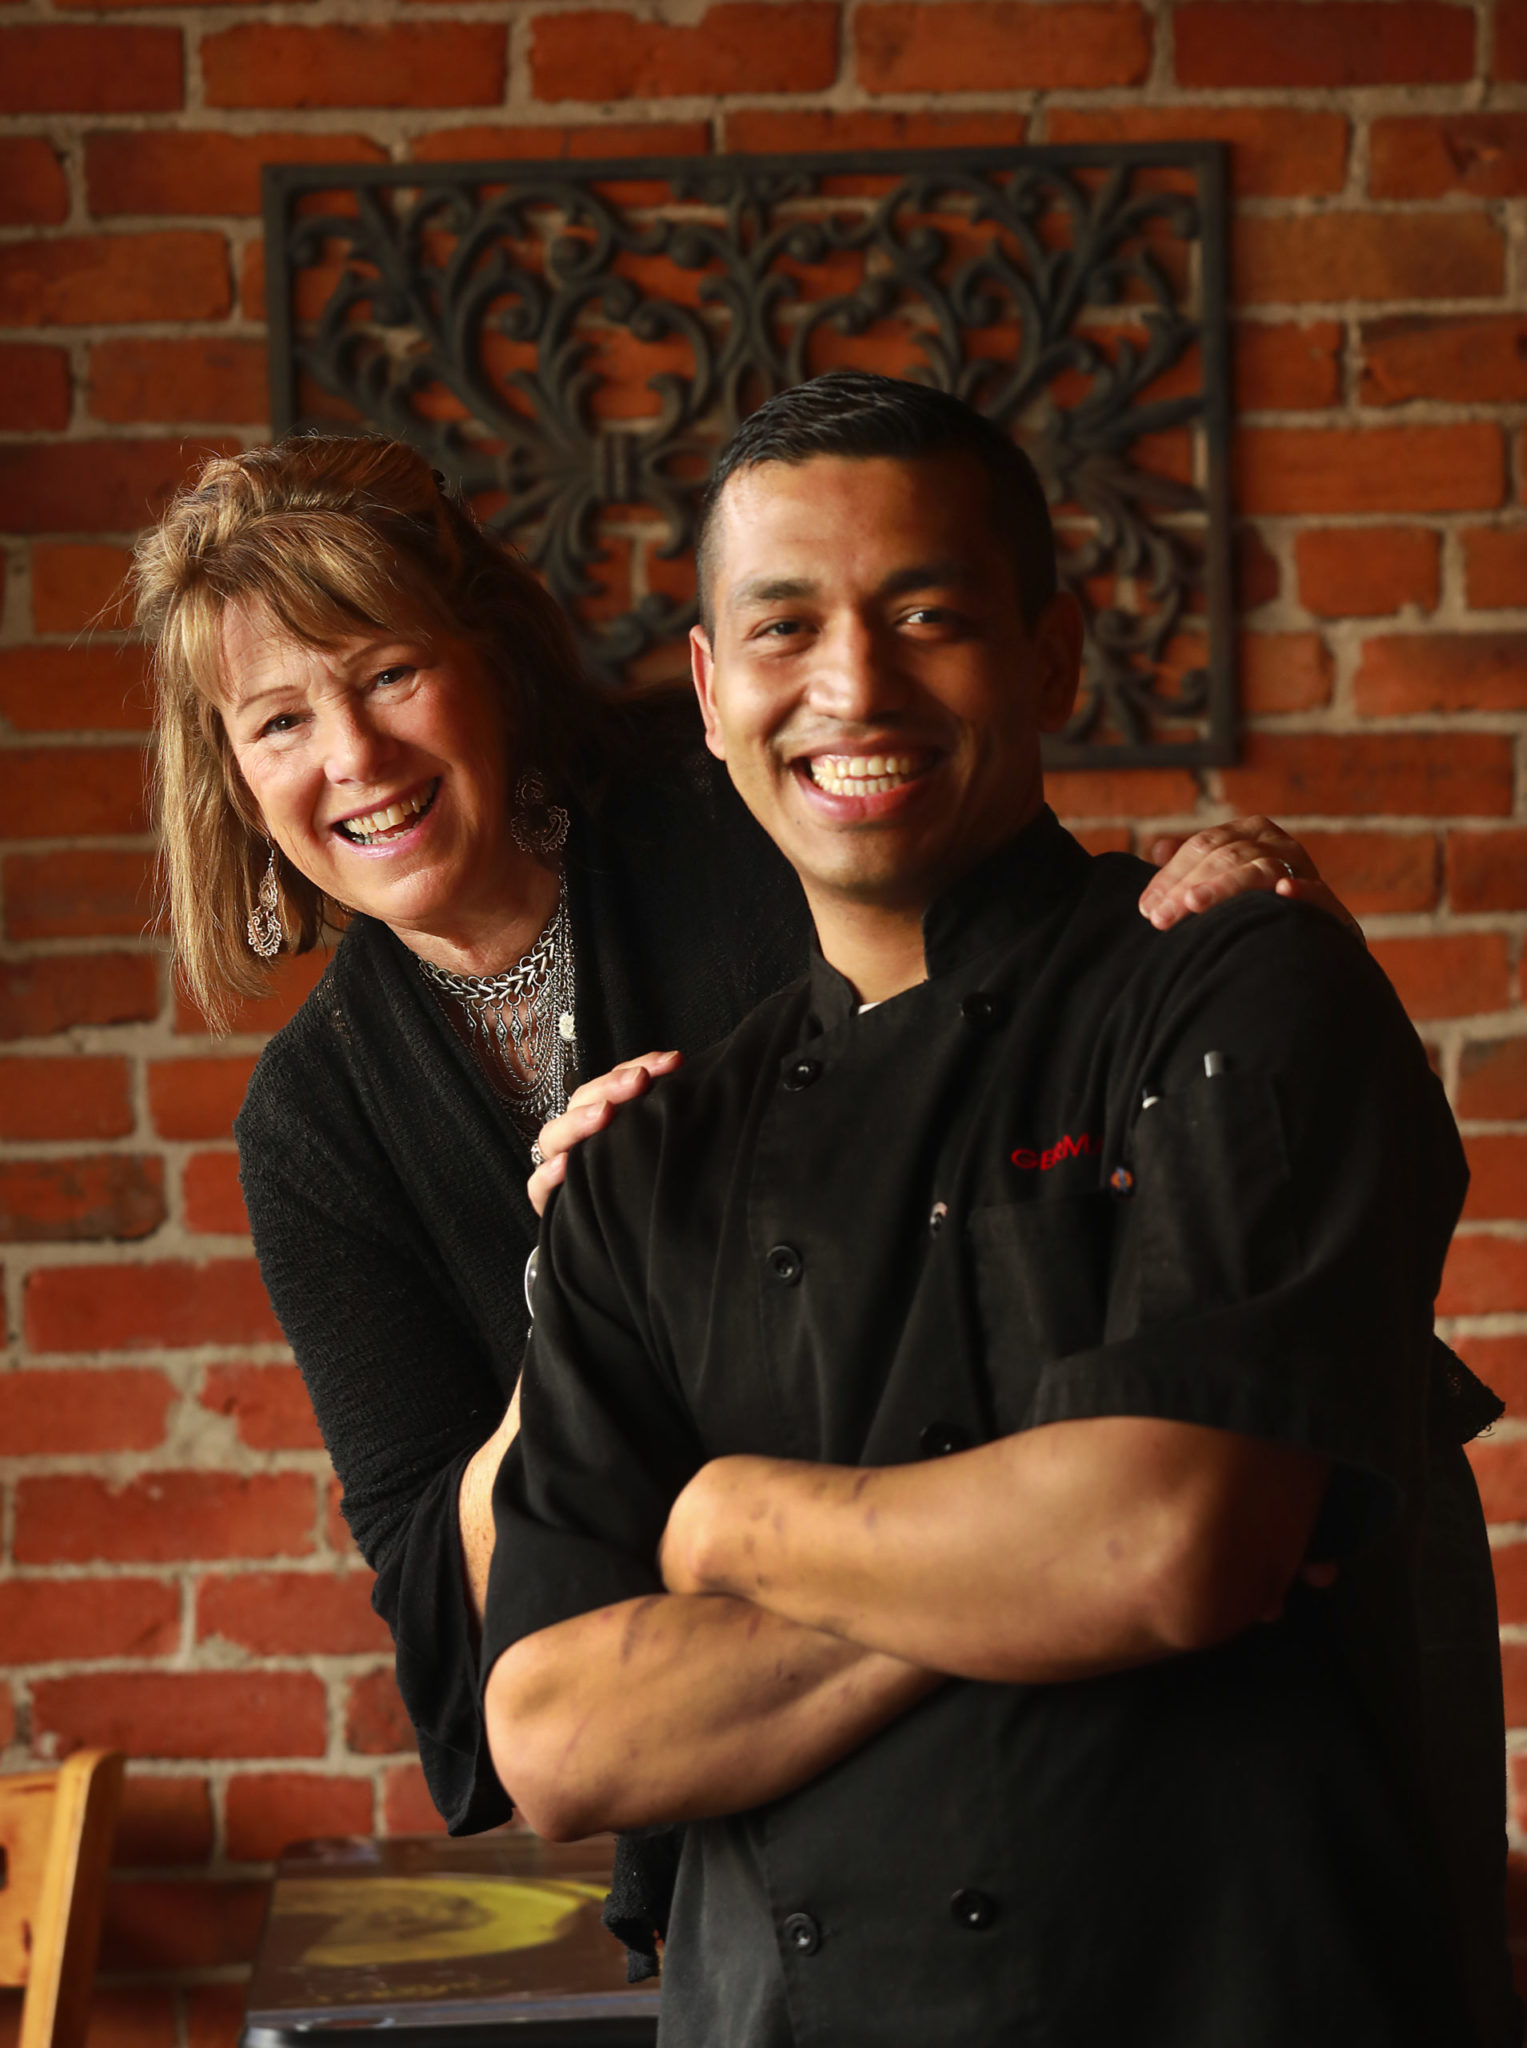 Owner and restaurant designer Shawn E. Hall and her chef German Bacho at the Gypsy Cafe in Sebastopol.